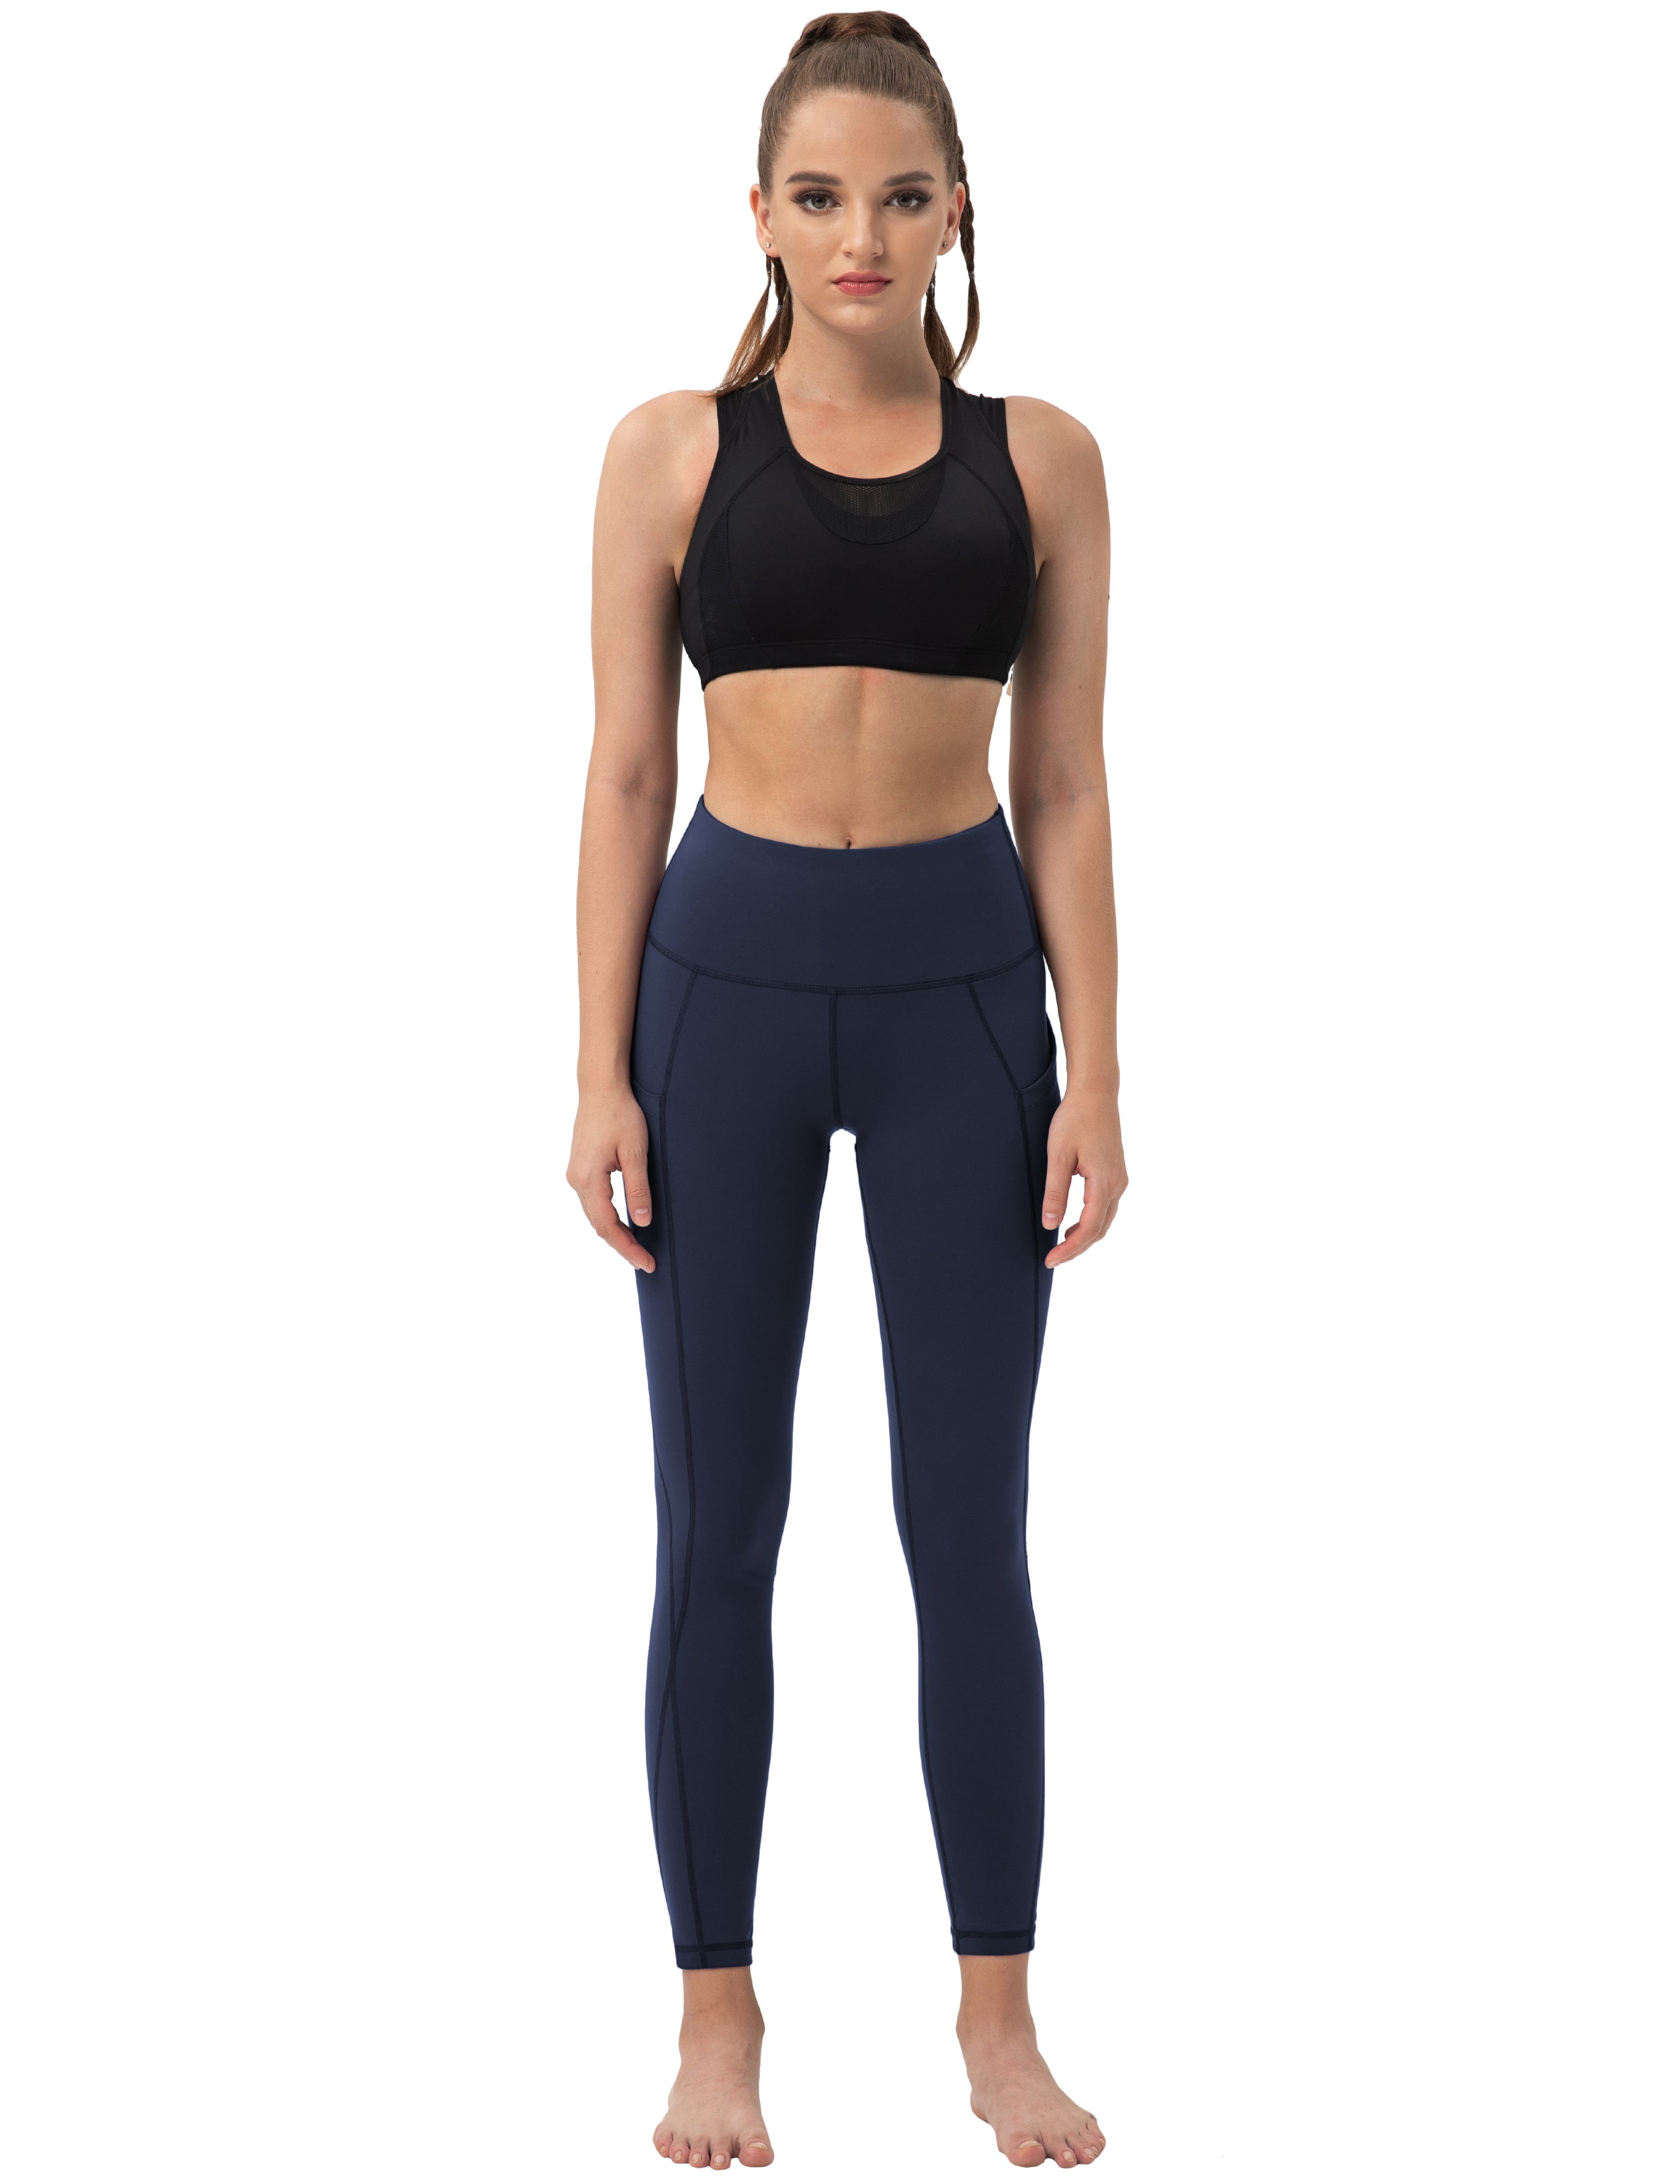 High Waist Side Pockets Yoga Pants darknavy 75% Nylon, 25% Spandex Fabric doesn't attract lint easily 4-way stretch No see-through Moisture-wicking Tummy control Inner pocket